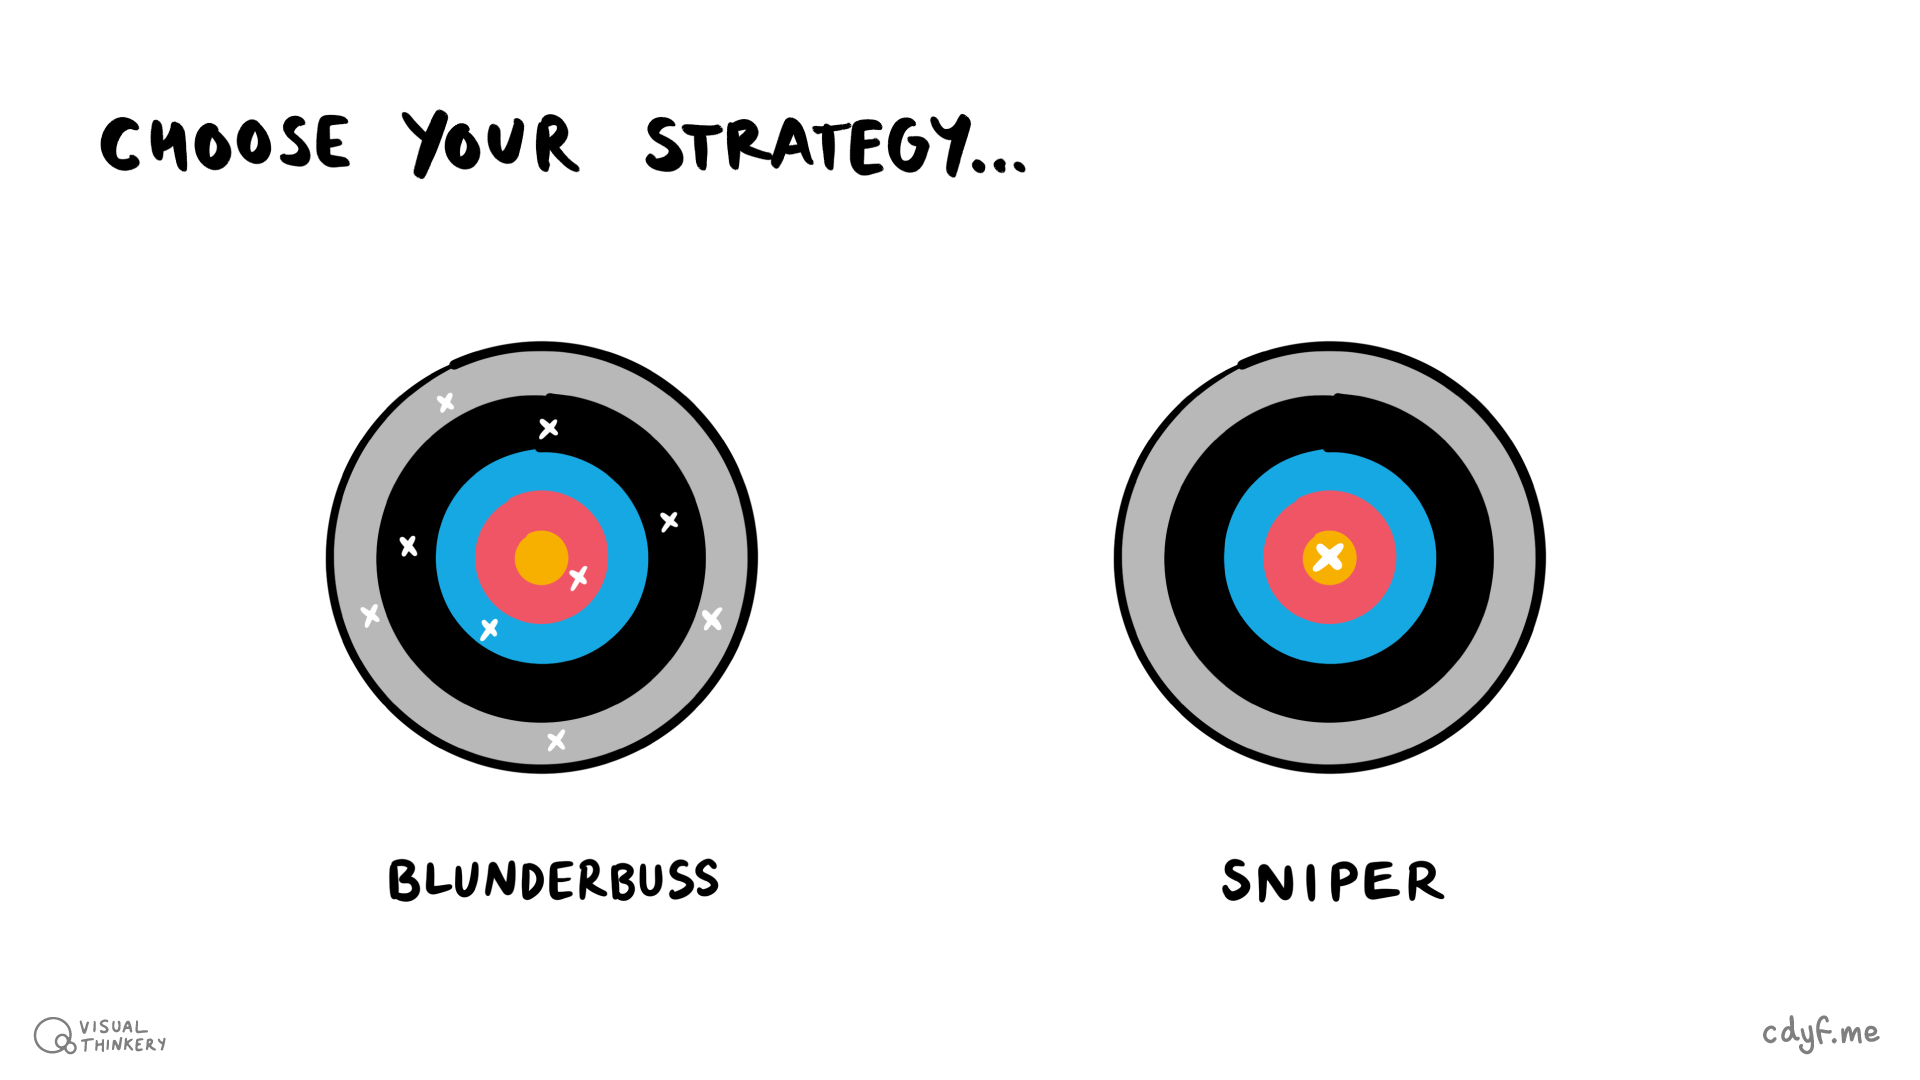 As you target employers, what will your strategy be? At one extreme you could optimise the quantity of your applications, aiming to do as many as you can. This is shown in the left of the picture by the blunderbuss (or scattergun) strategy. You make lots of applications but don’t target or tailor them much in the hope that some will hit the target if you point your weapon the right general direction. At the other extreme you could emphasise the quality of your applications by spending more time researching the employer and carefully aiming your shots more like a sniper would (in the right of the figure). Which strategy is best? Blunderbuss sketch by Visual Thinkery is licensed under CC-BY-ND